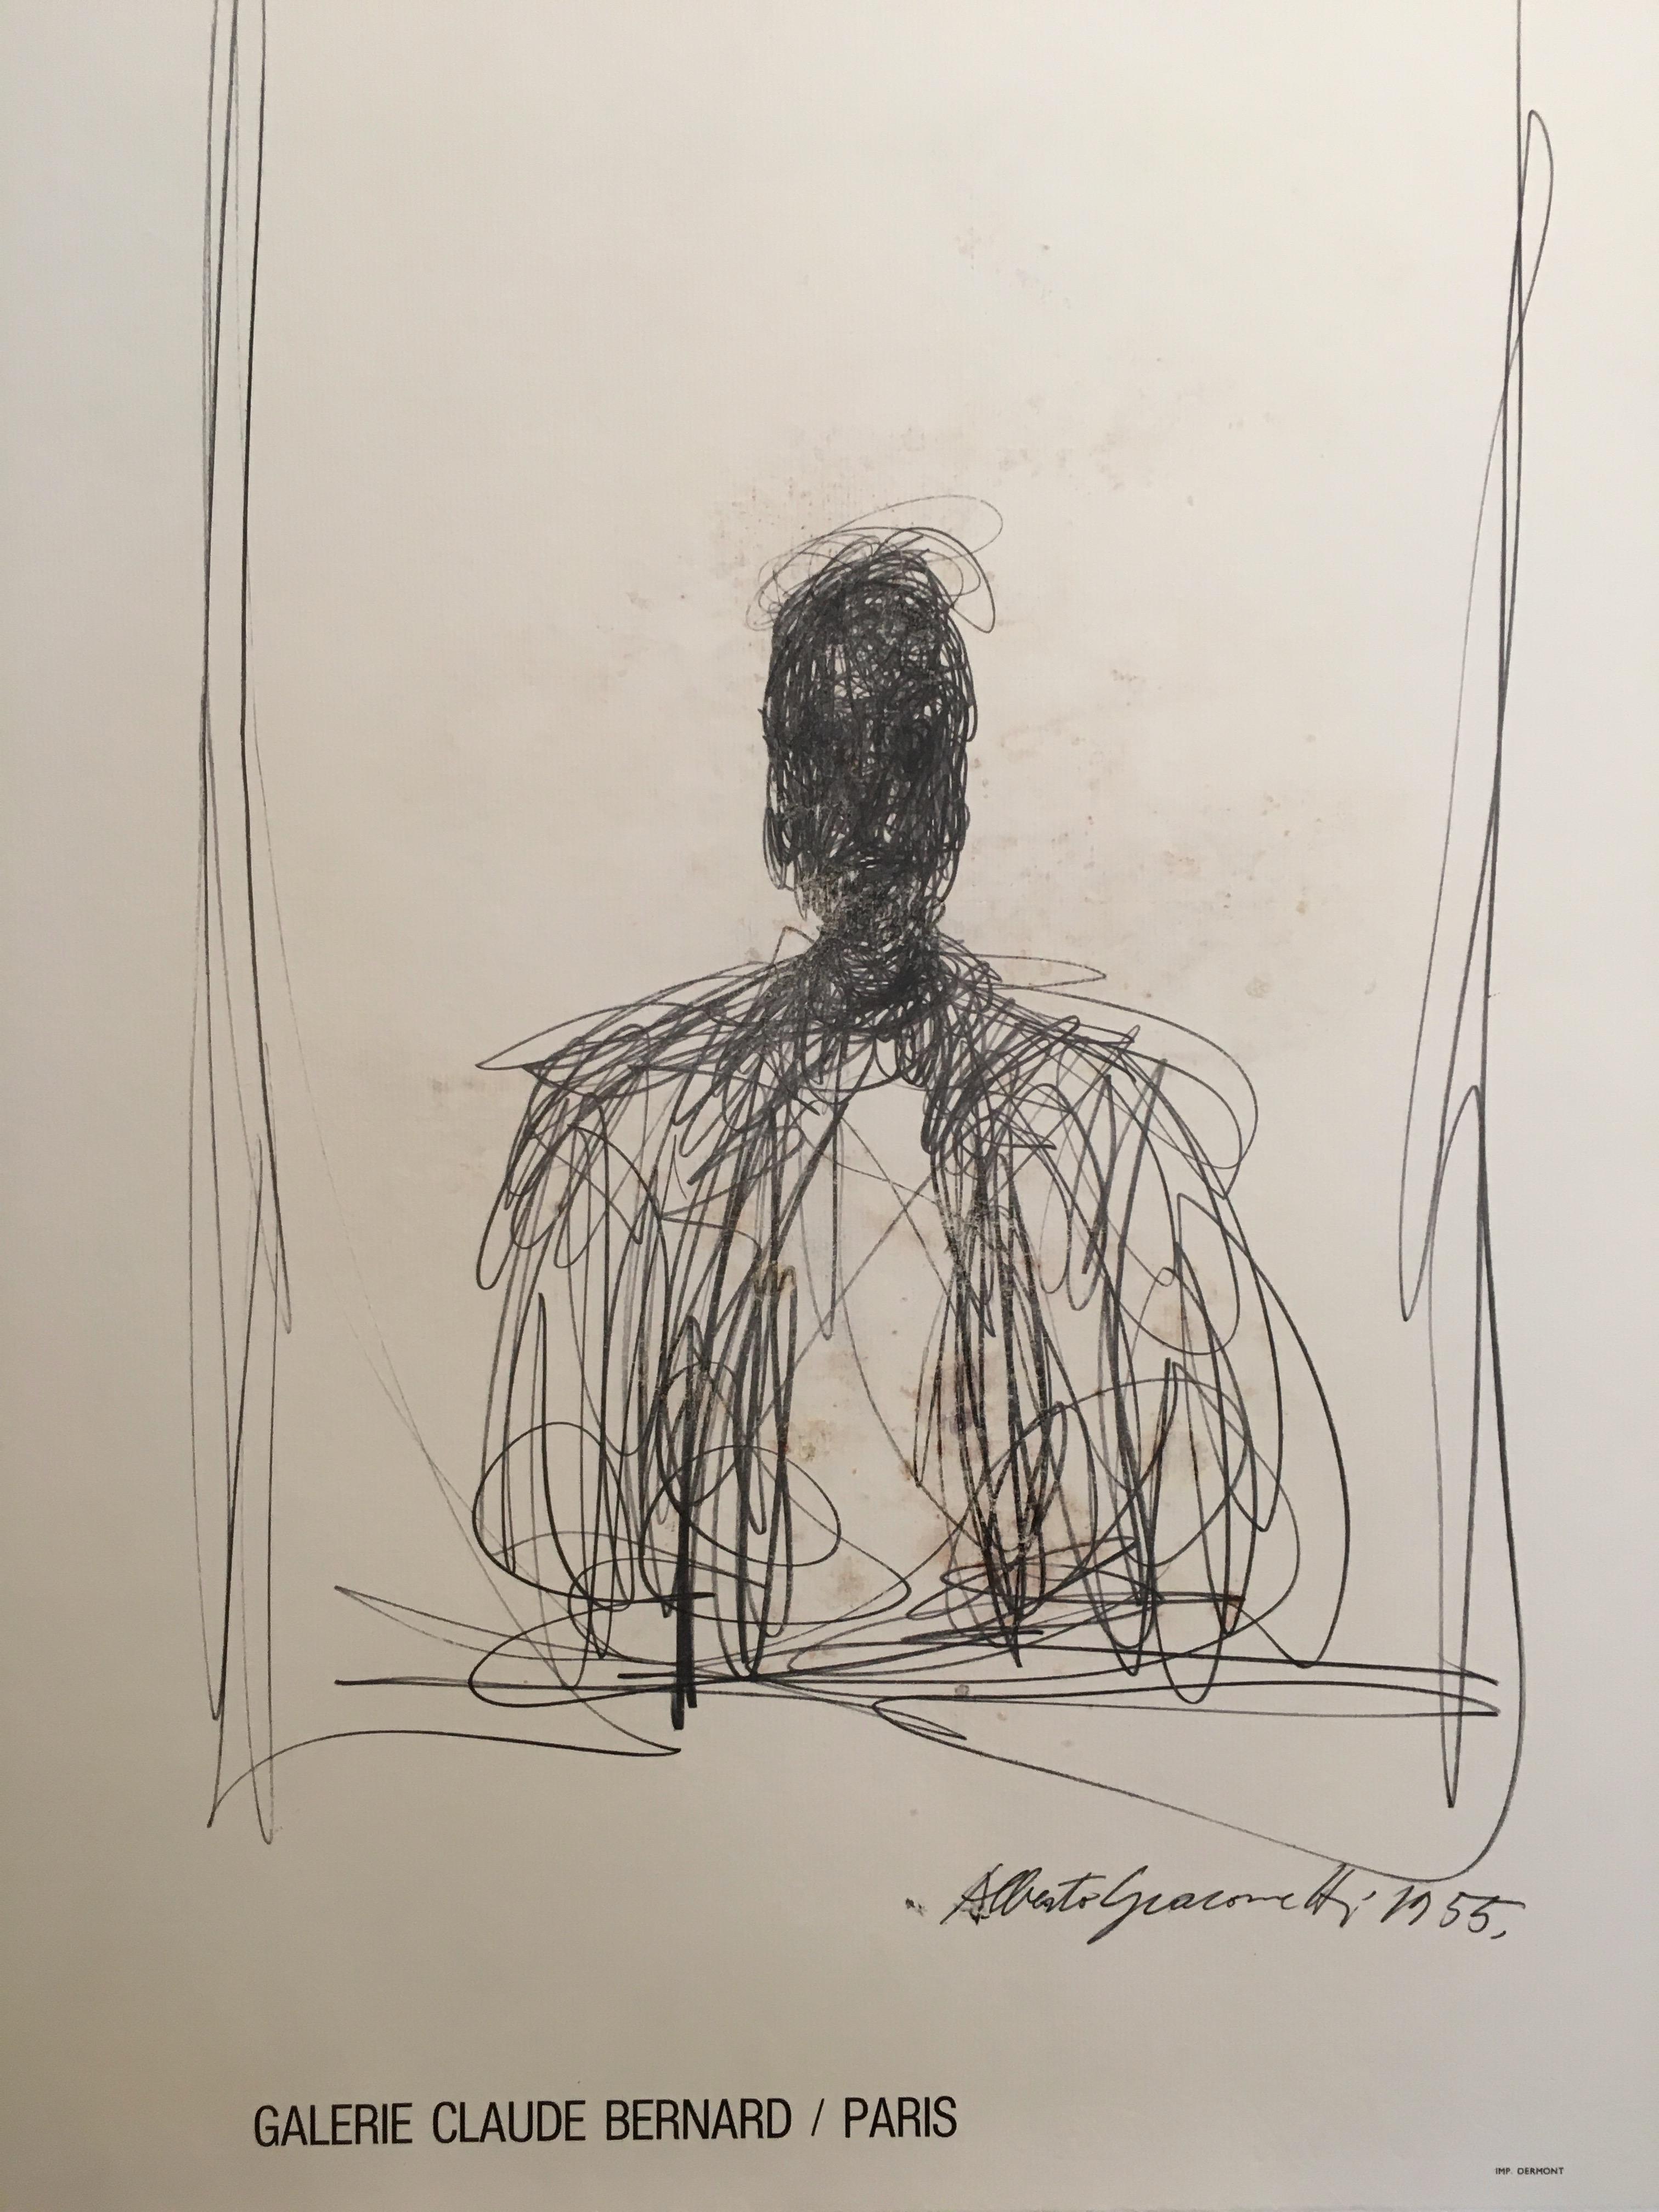 Alberto Giacometti original galley and exhibition poster, Galerie Claude Bernard

Alberto Giacometti is best known for his elongated, withered representations of the human form, including his 1960 sculpture walking man.

Artist:
Alberto